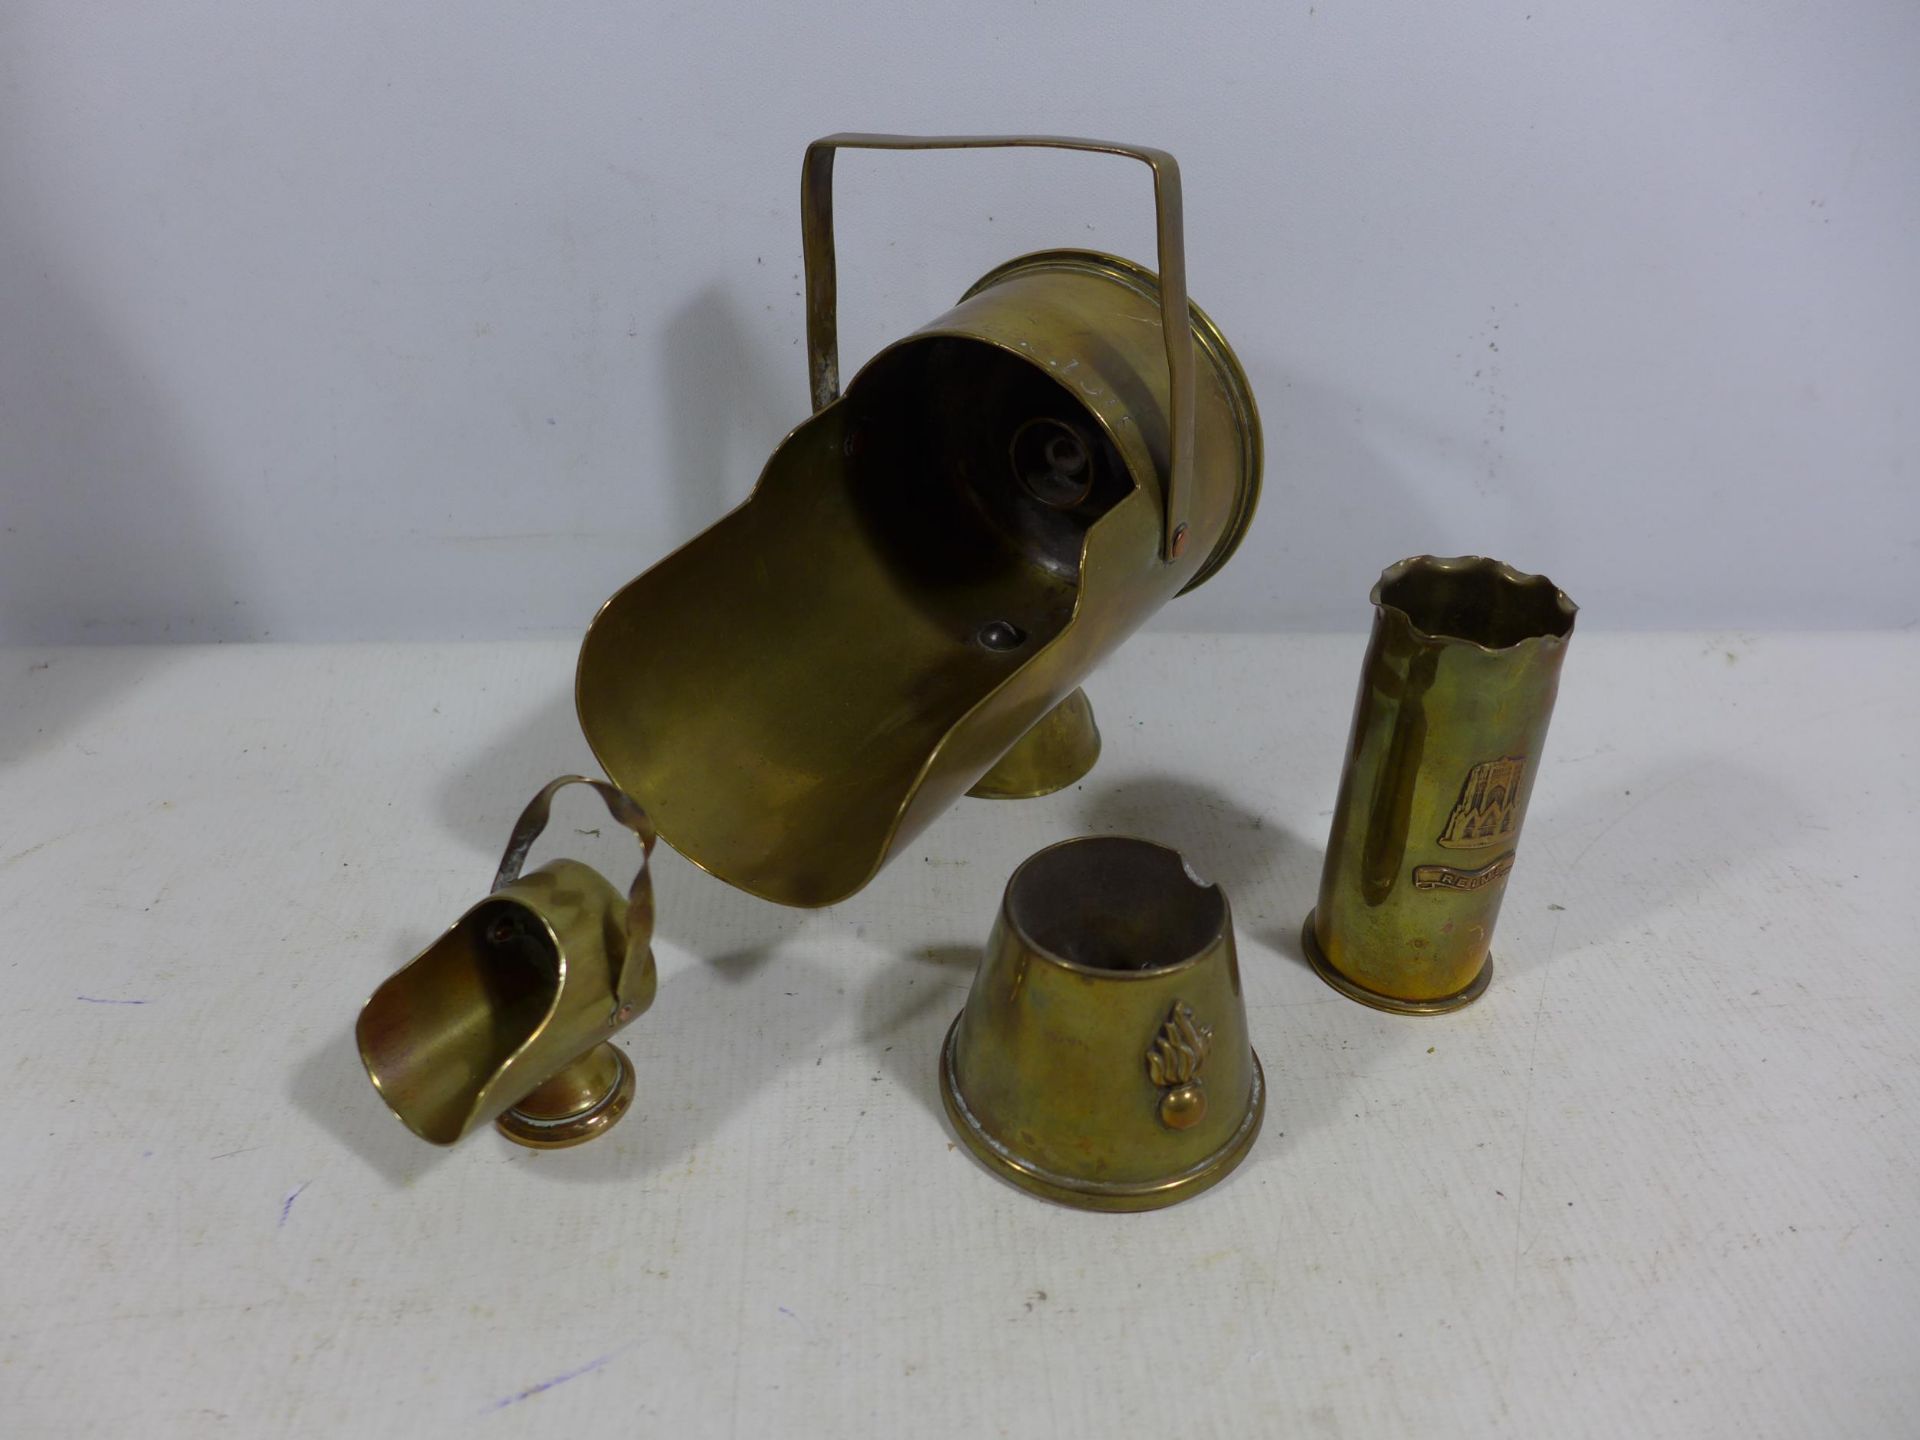 FOUR BRASS WORLD WAR I TRENCH ART ITEMS, TO INCLUDE TWO HELMET SHAPED MINIATURE COAL BUCKETS